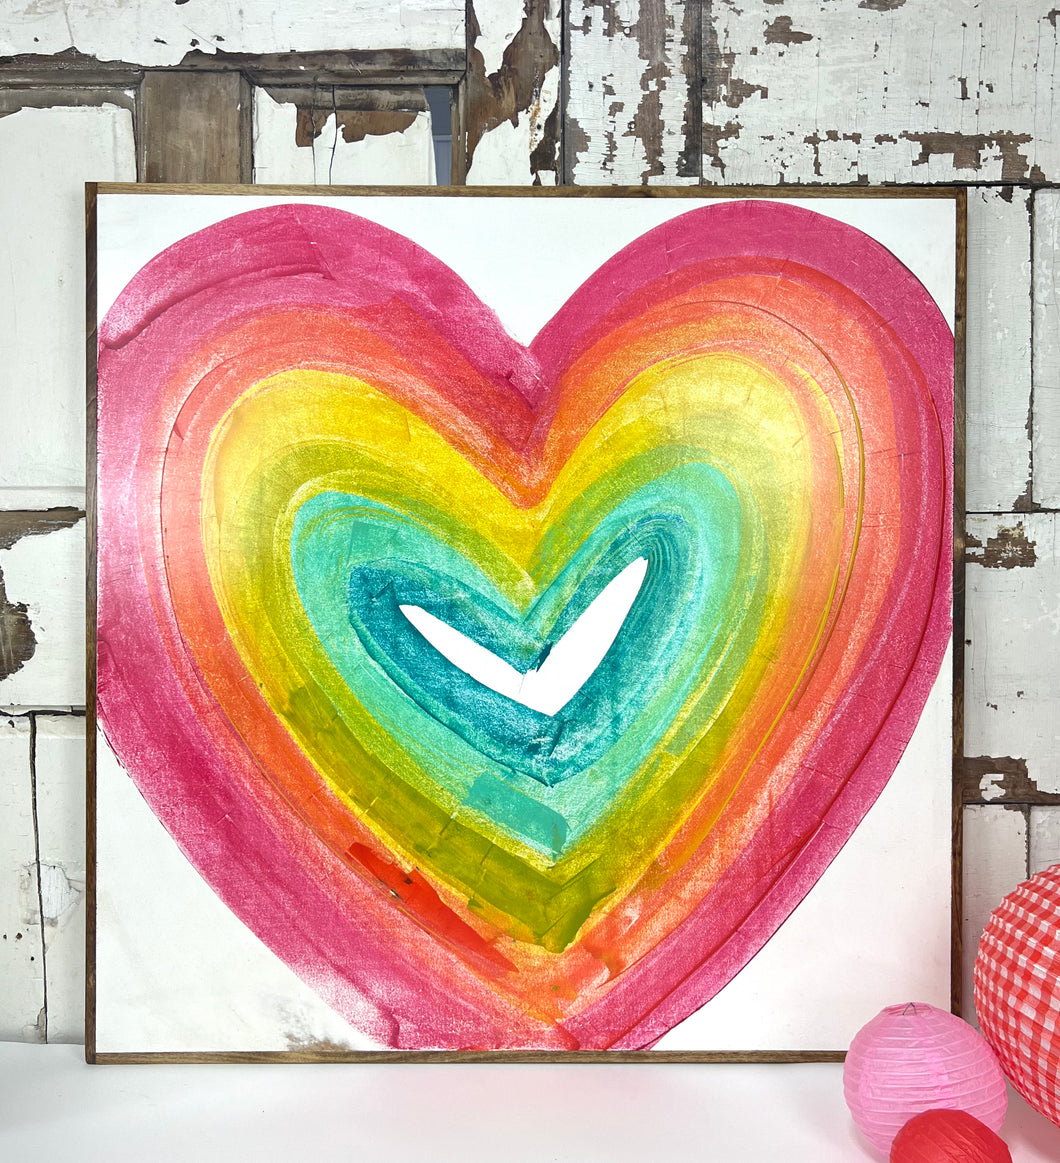 37x37 Hand-Painted Heart Sign E